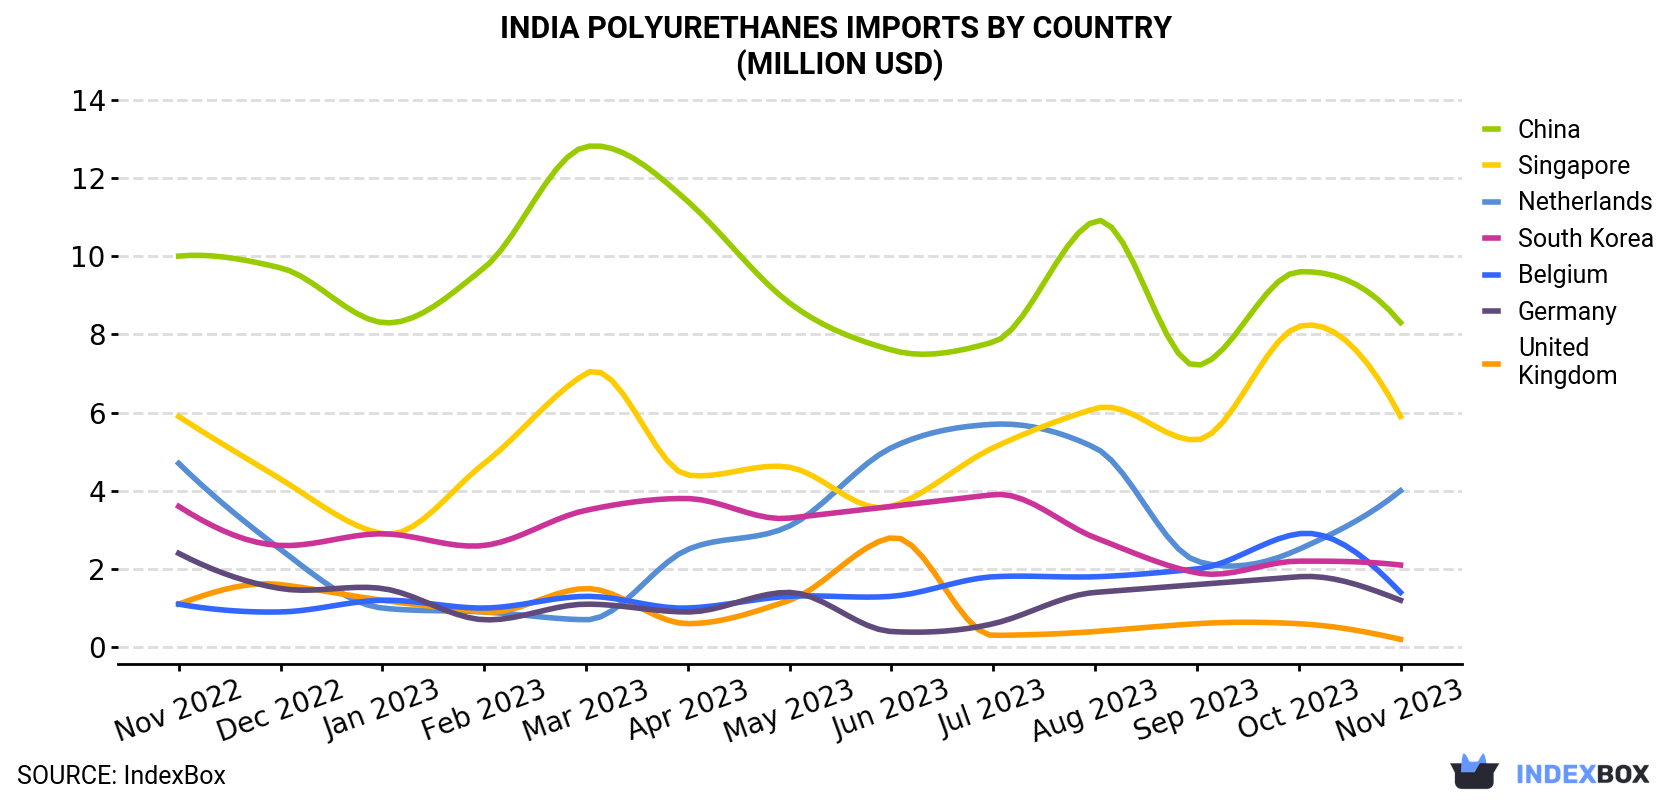 India Polyurethanes Imports By Country (Million USD)